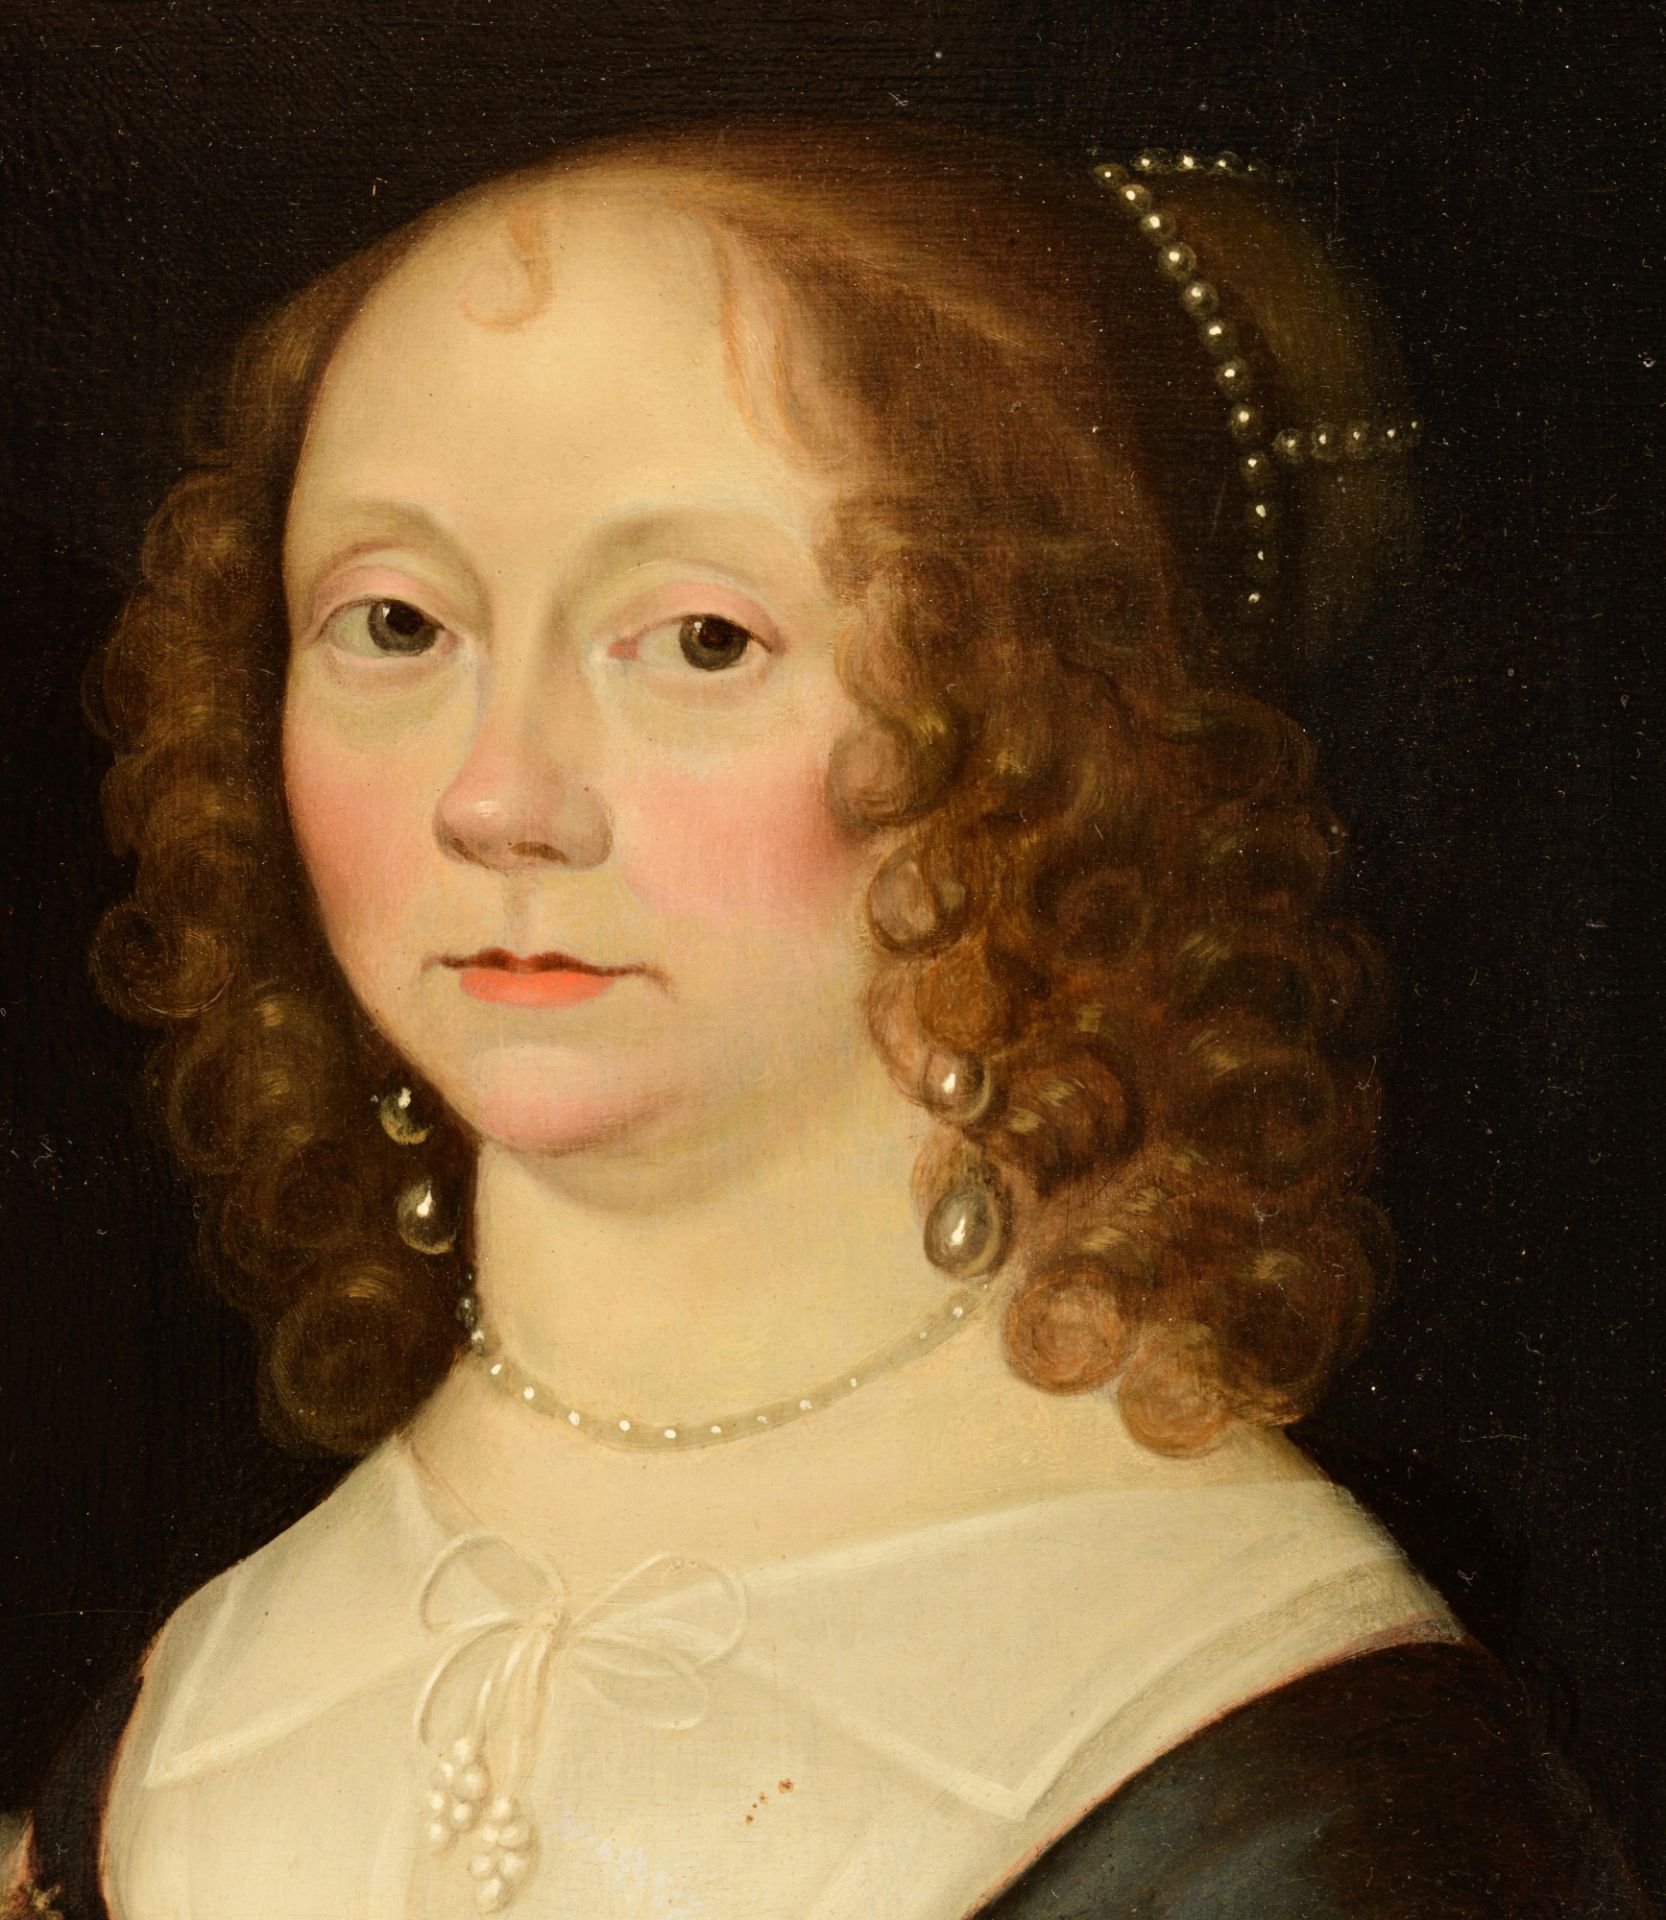 Downing, the portrait of a lady, 1643, 31 x 39 cm - Image 5 of 7